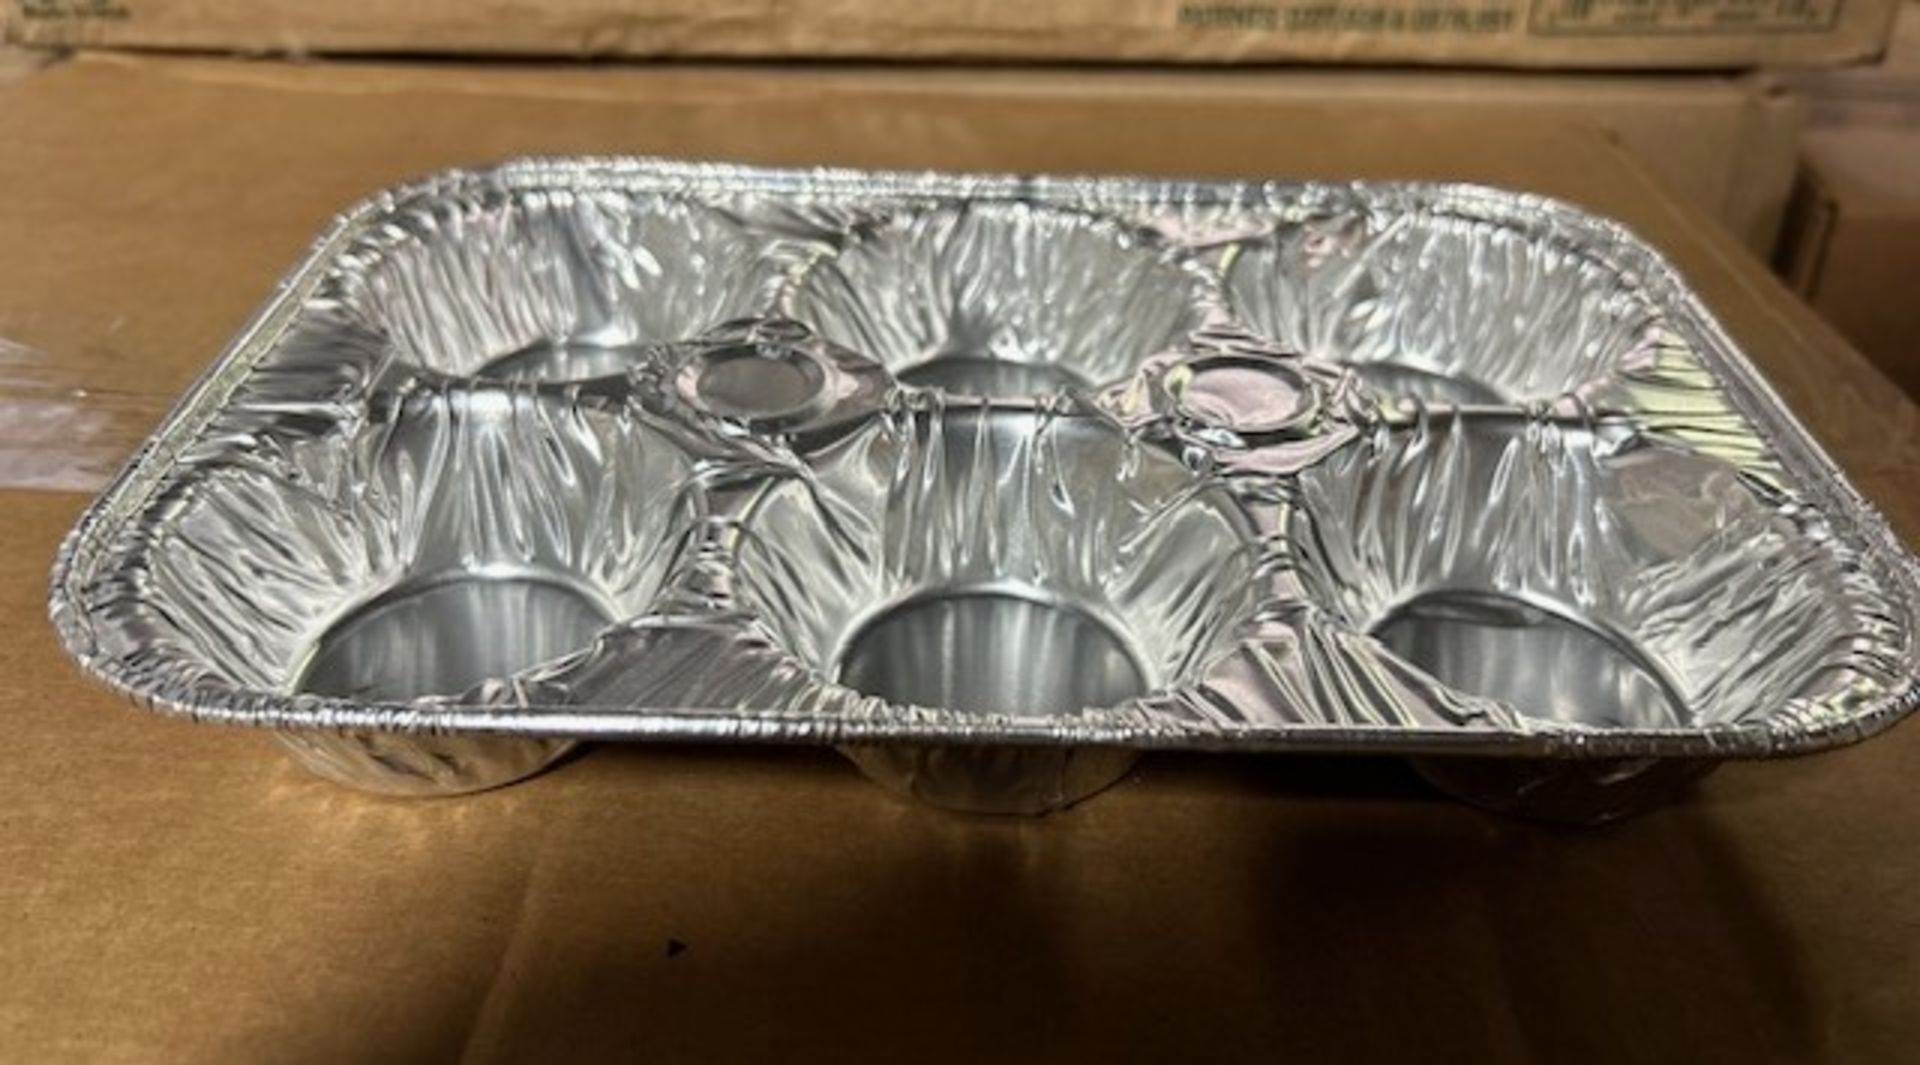 (2) Cases - Durable #1500-30 6 Cup Aluminum Muffin Tray (Pack 500)